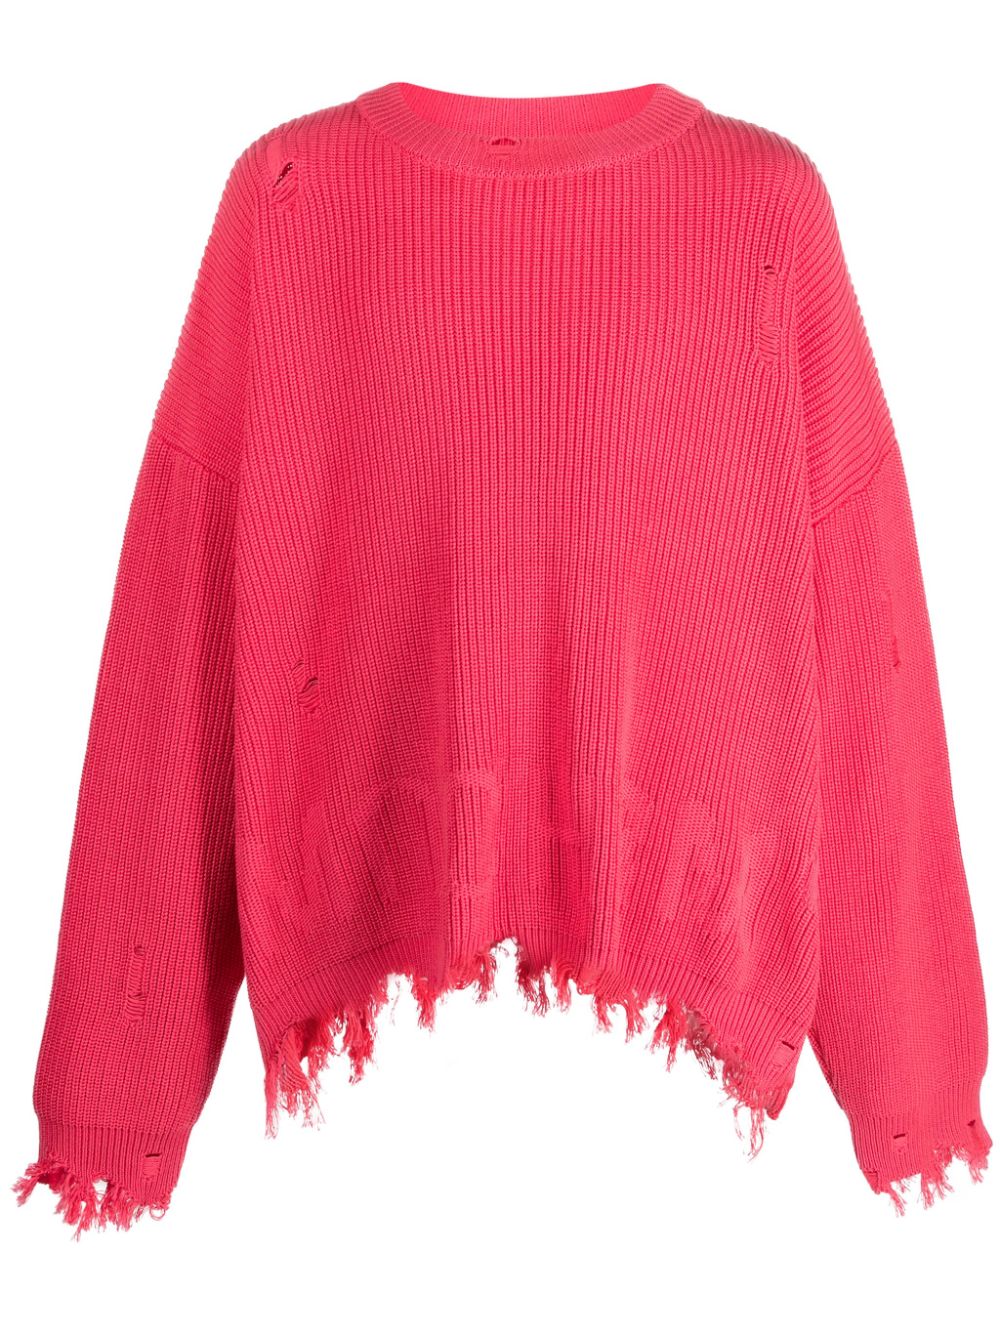 ribbed-knit ripped jumper